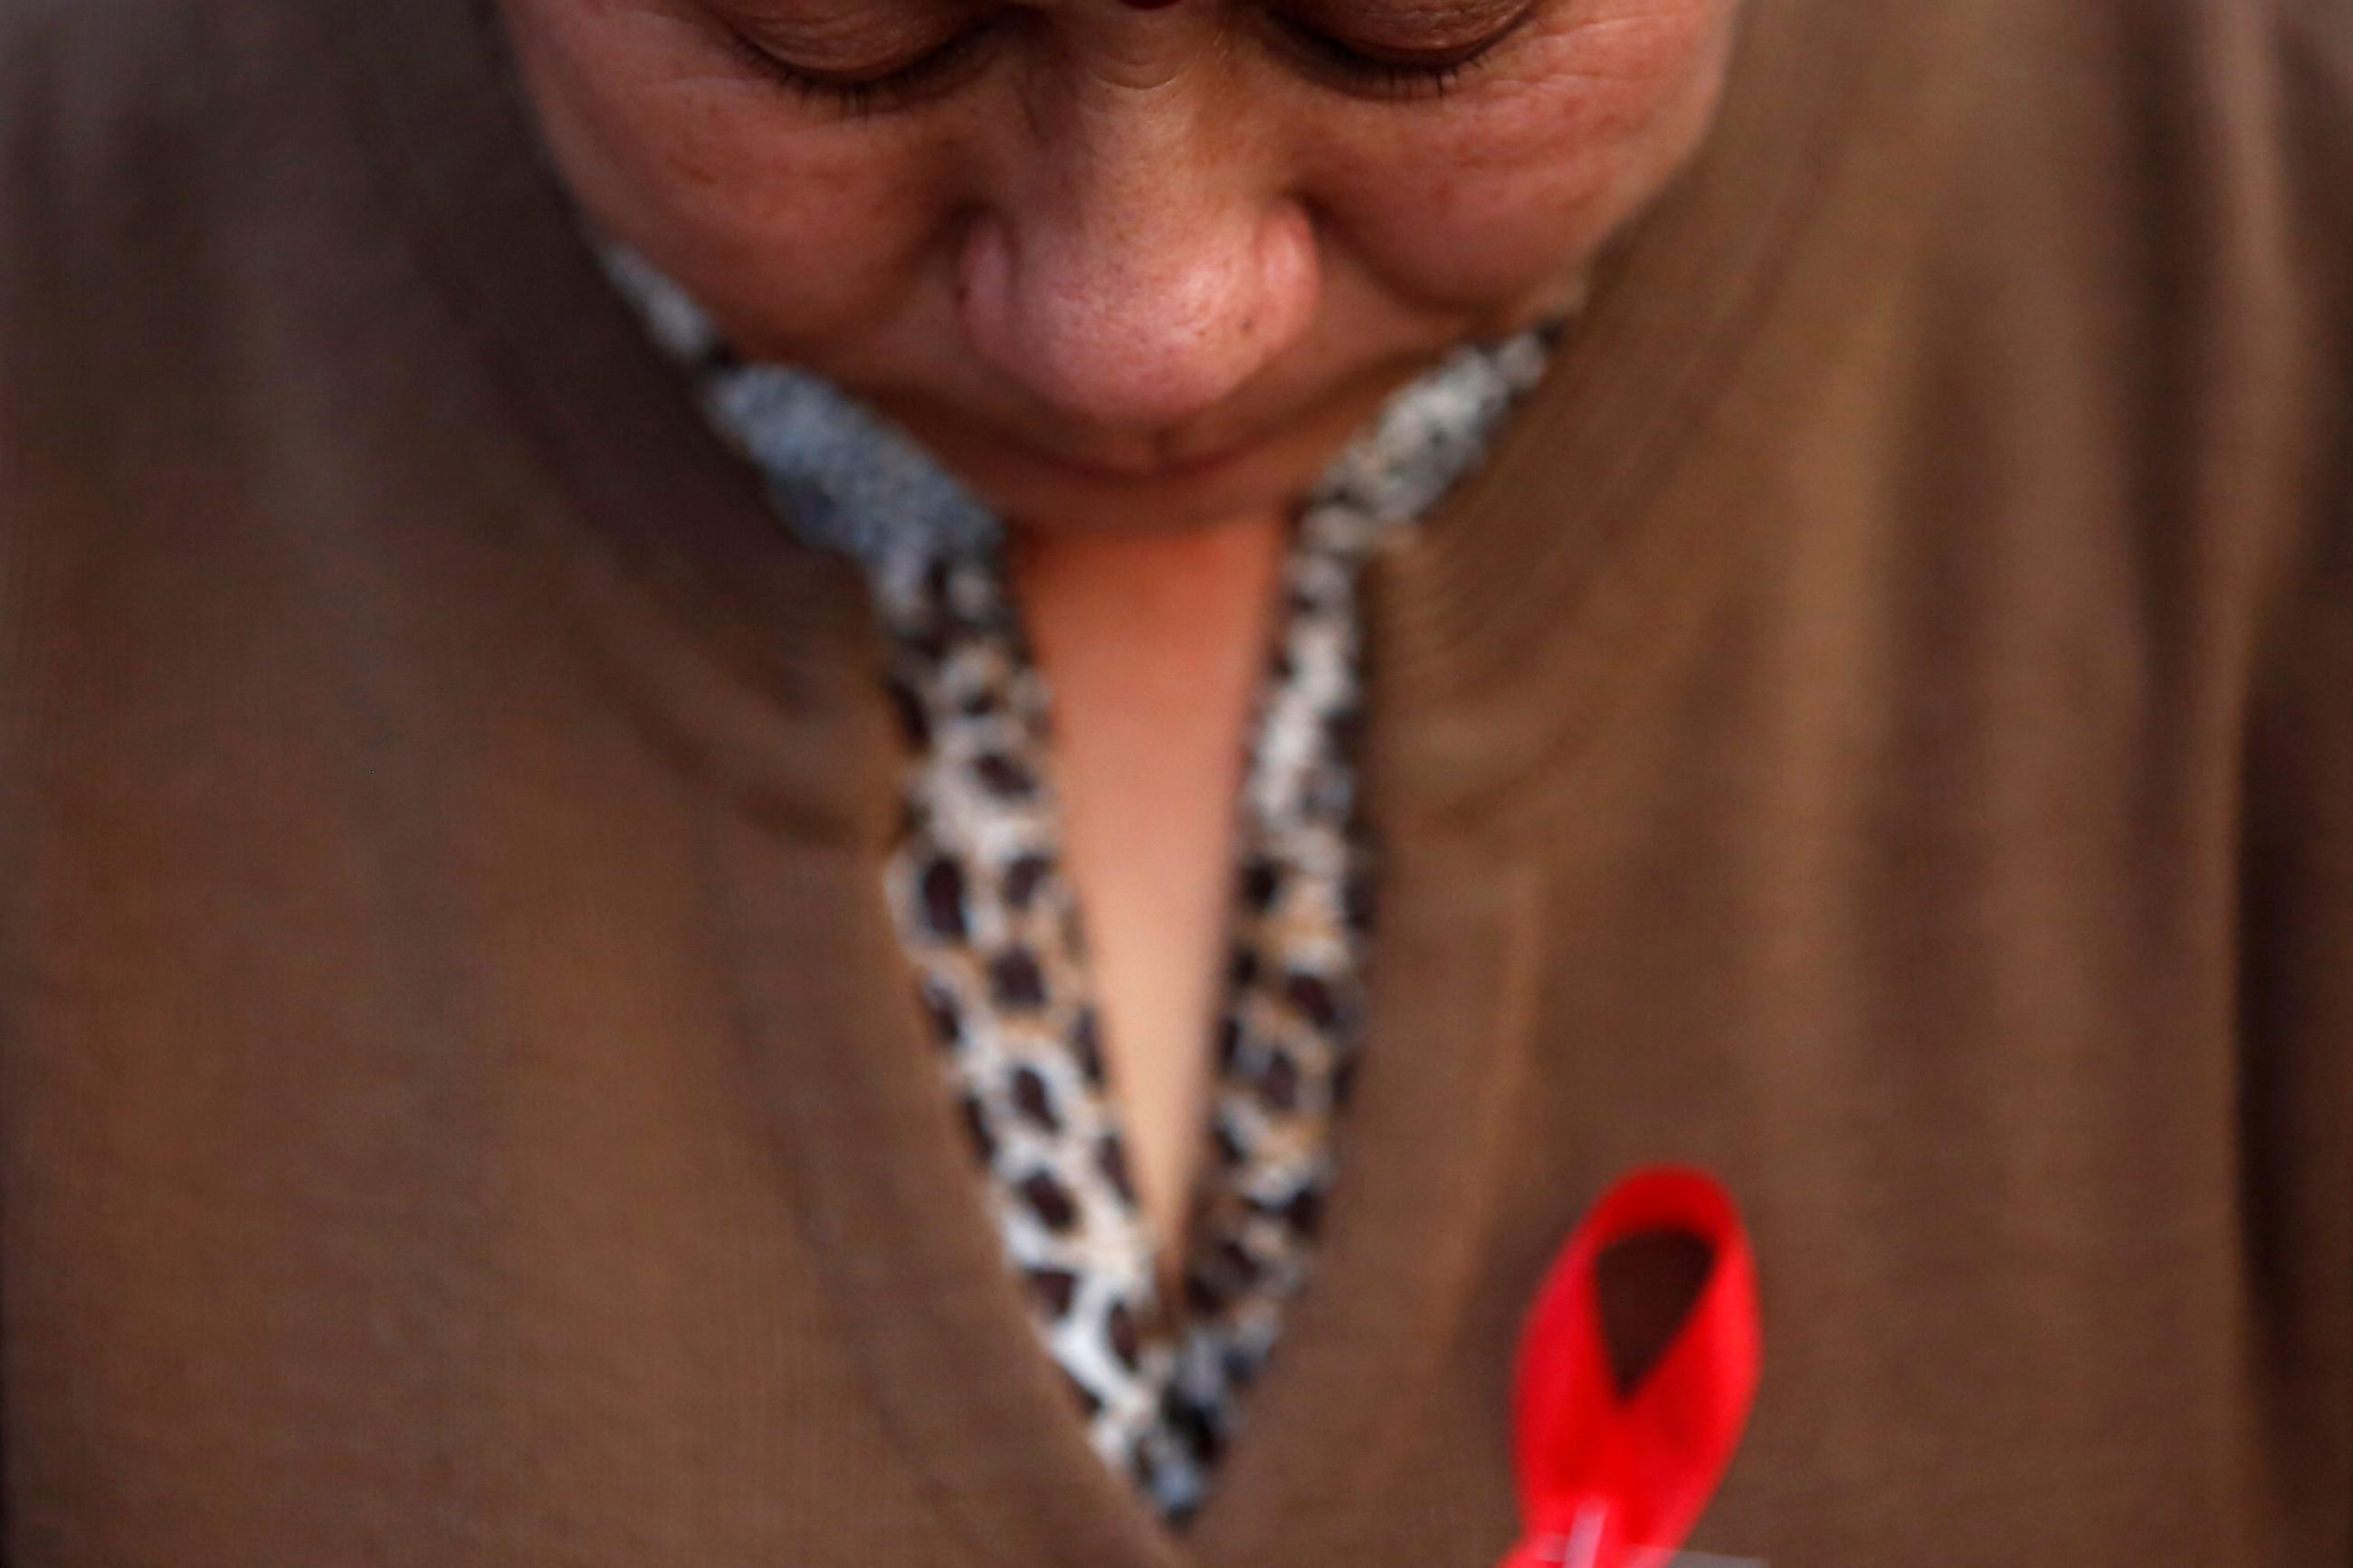 A participant with a red ribbon pin observes a minute of silence during a HIV/AIDS awareness campaign.